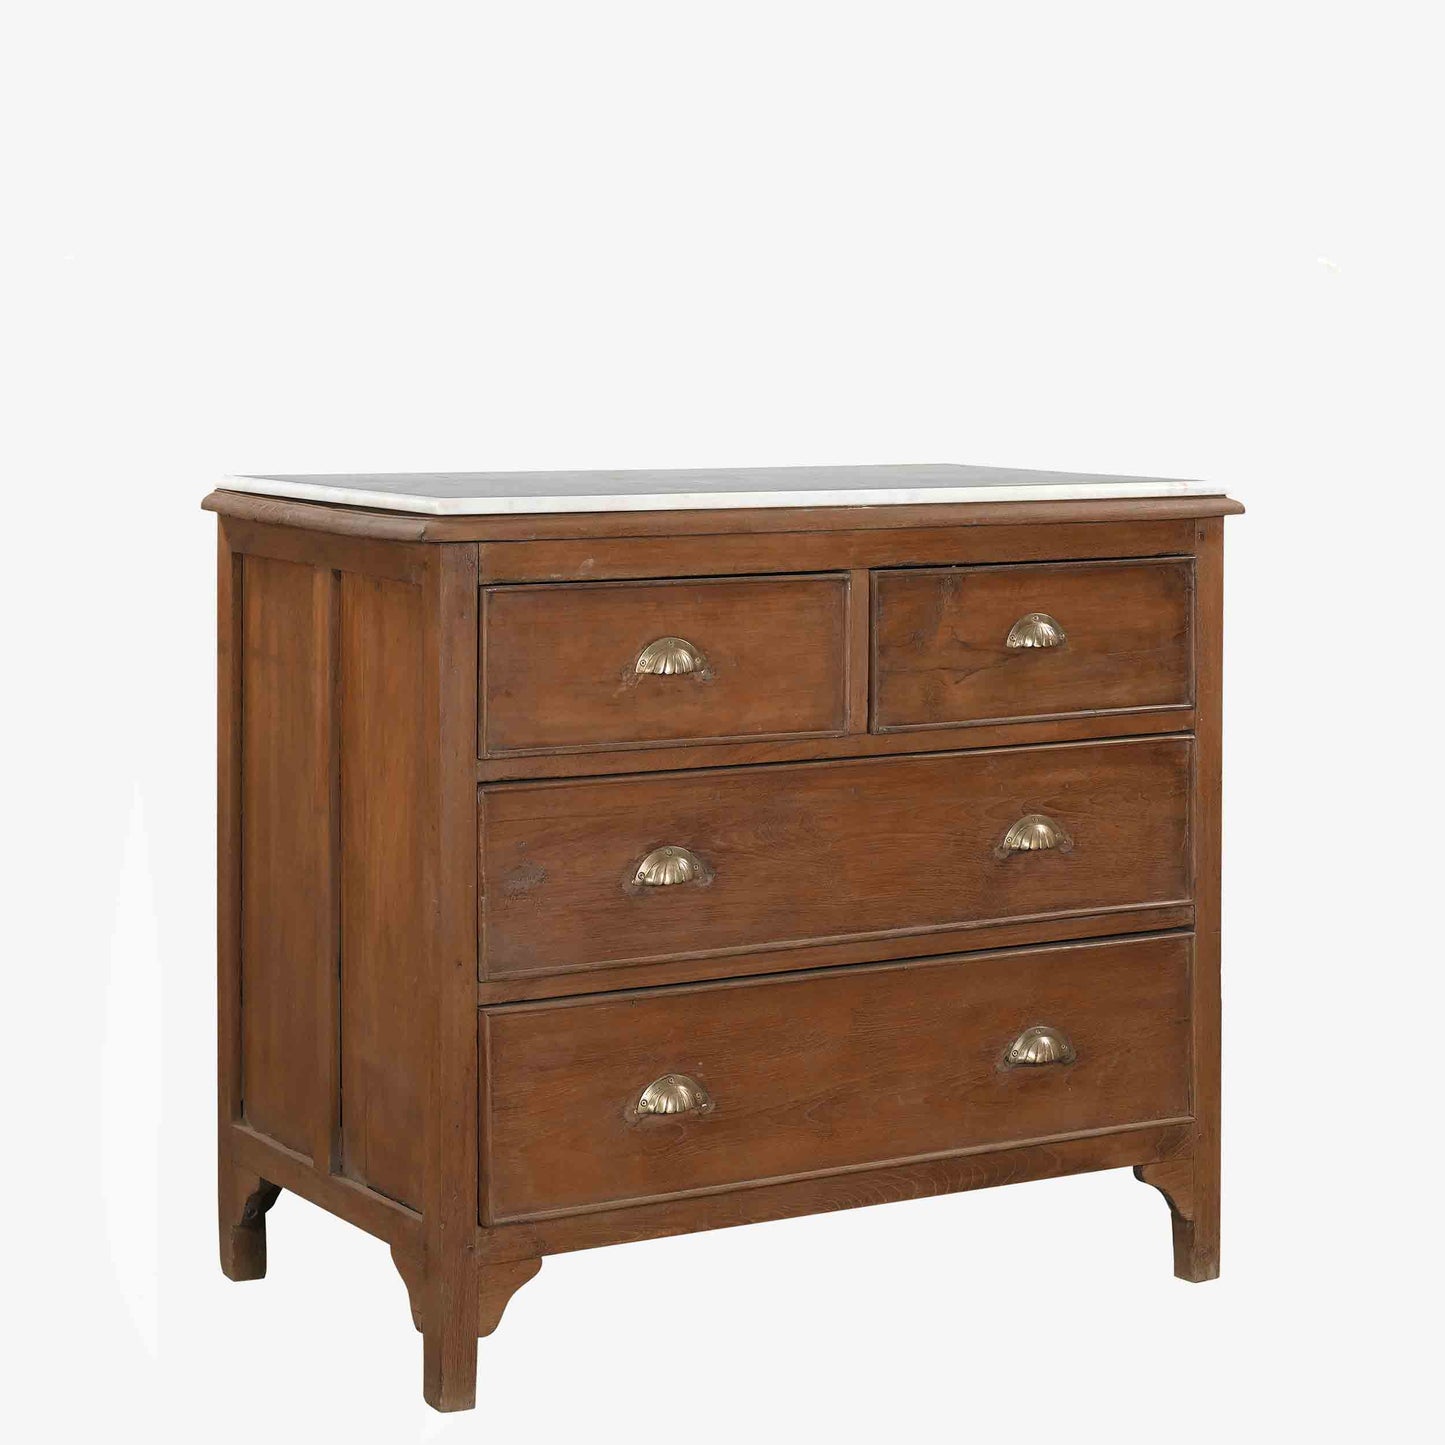 The Farna Antique Chest of Drawers with Marble